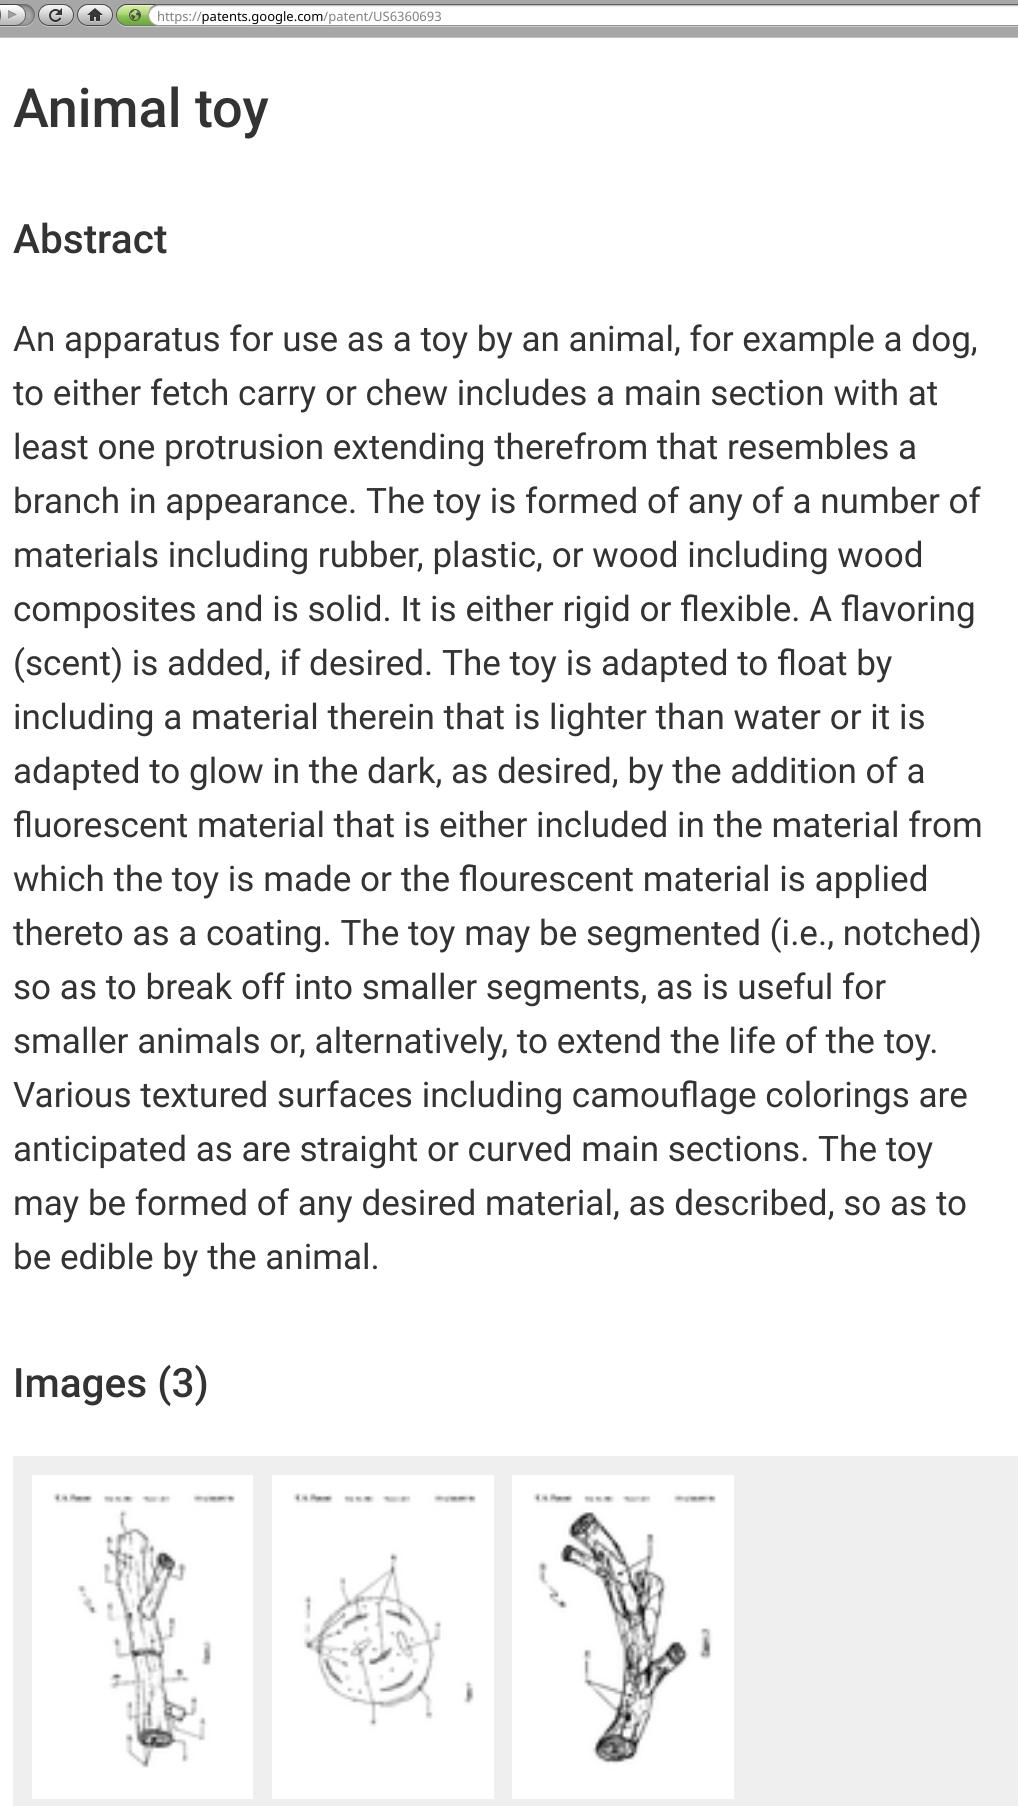 A patent on animal toy